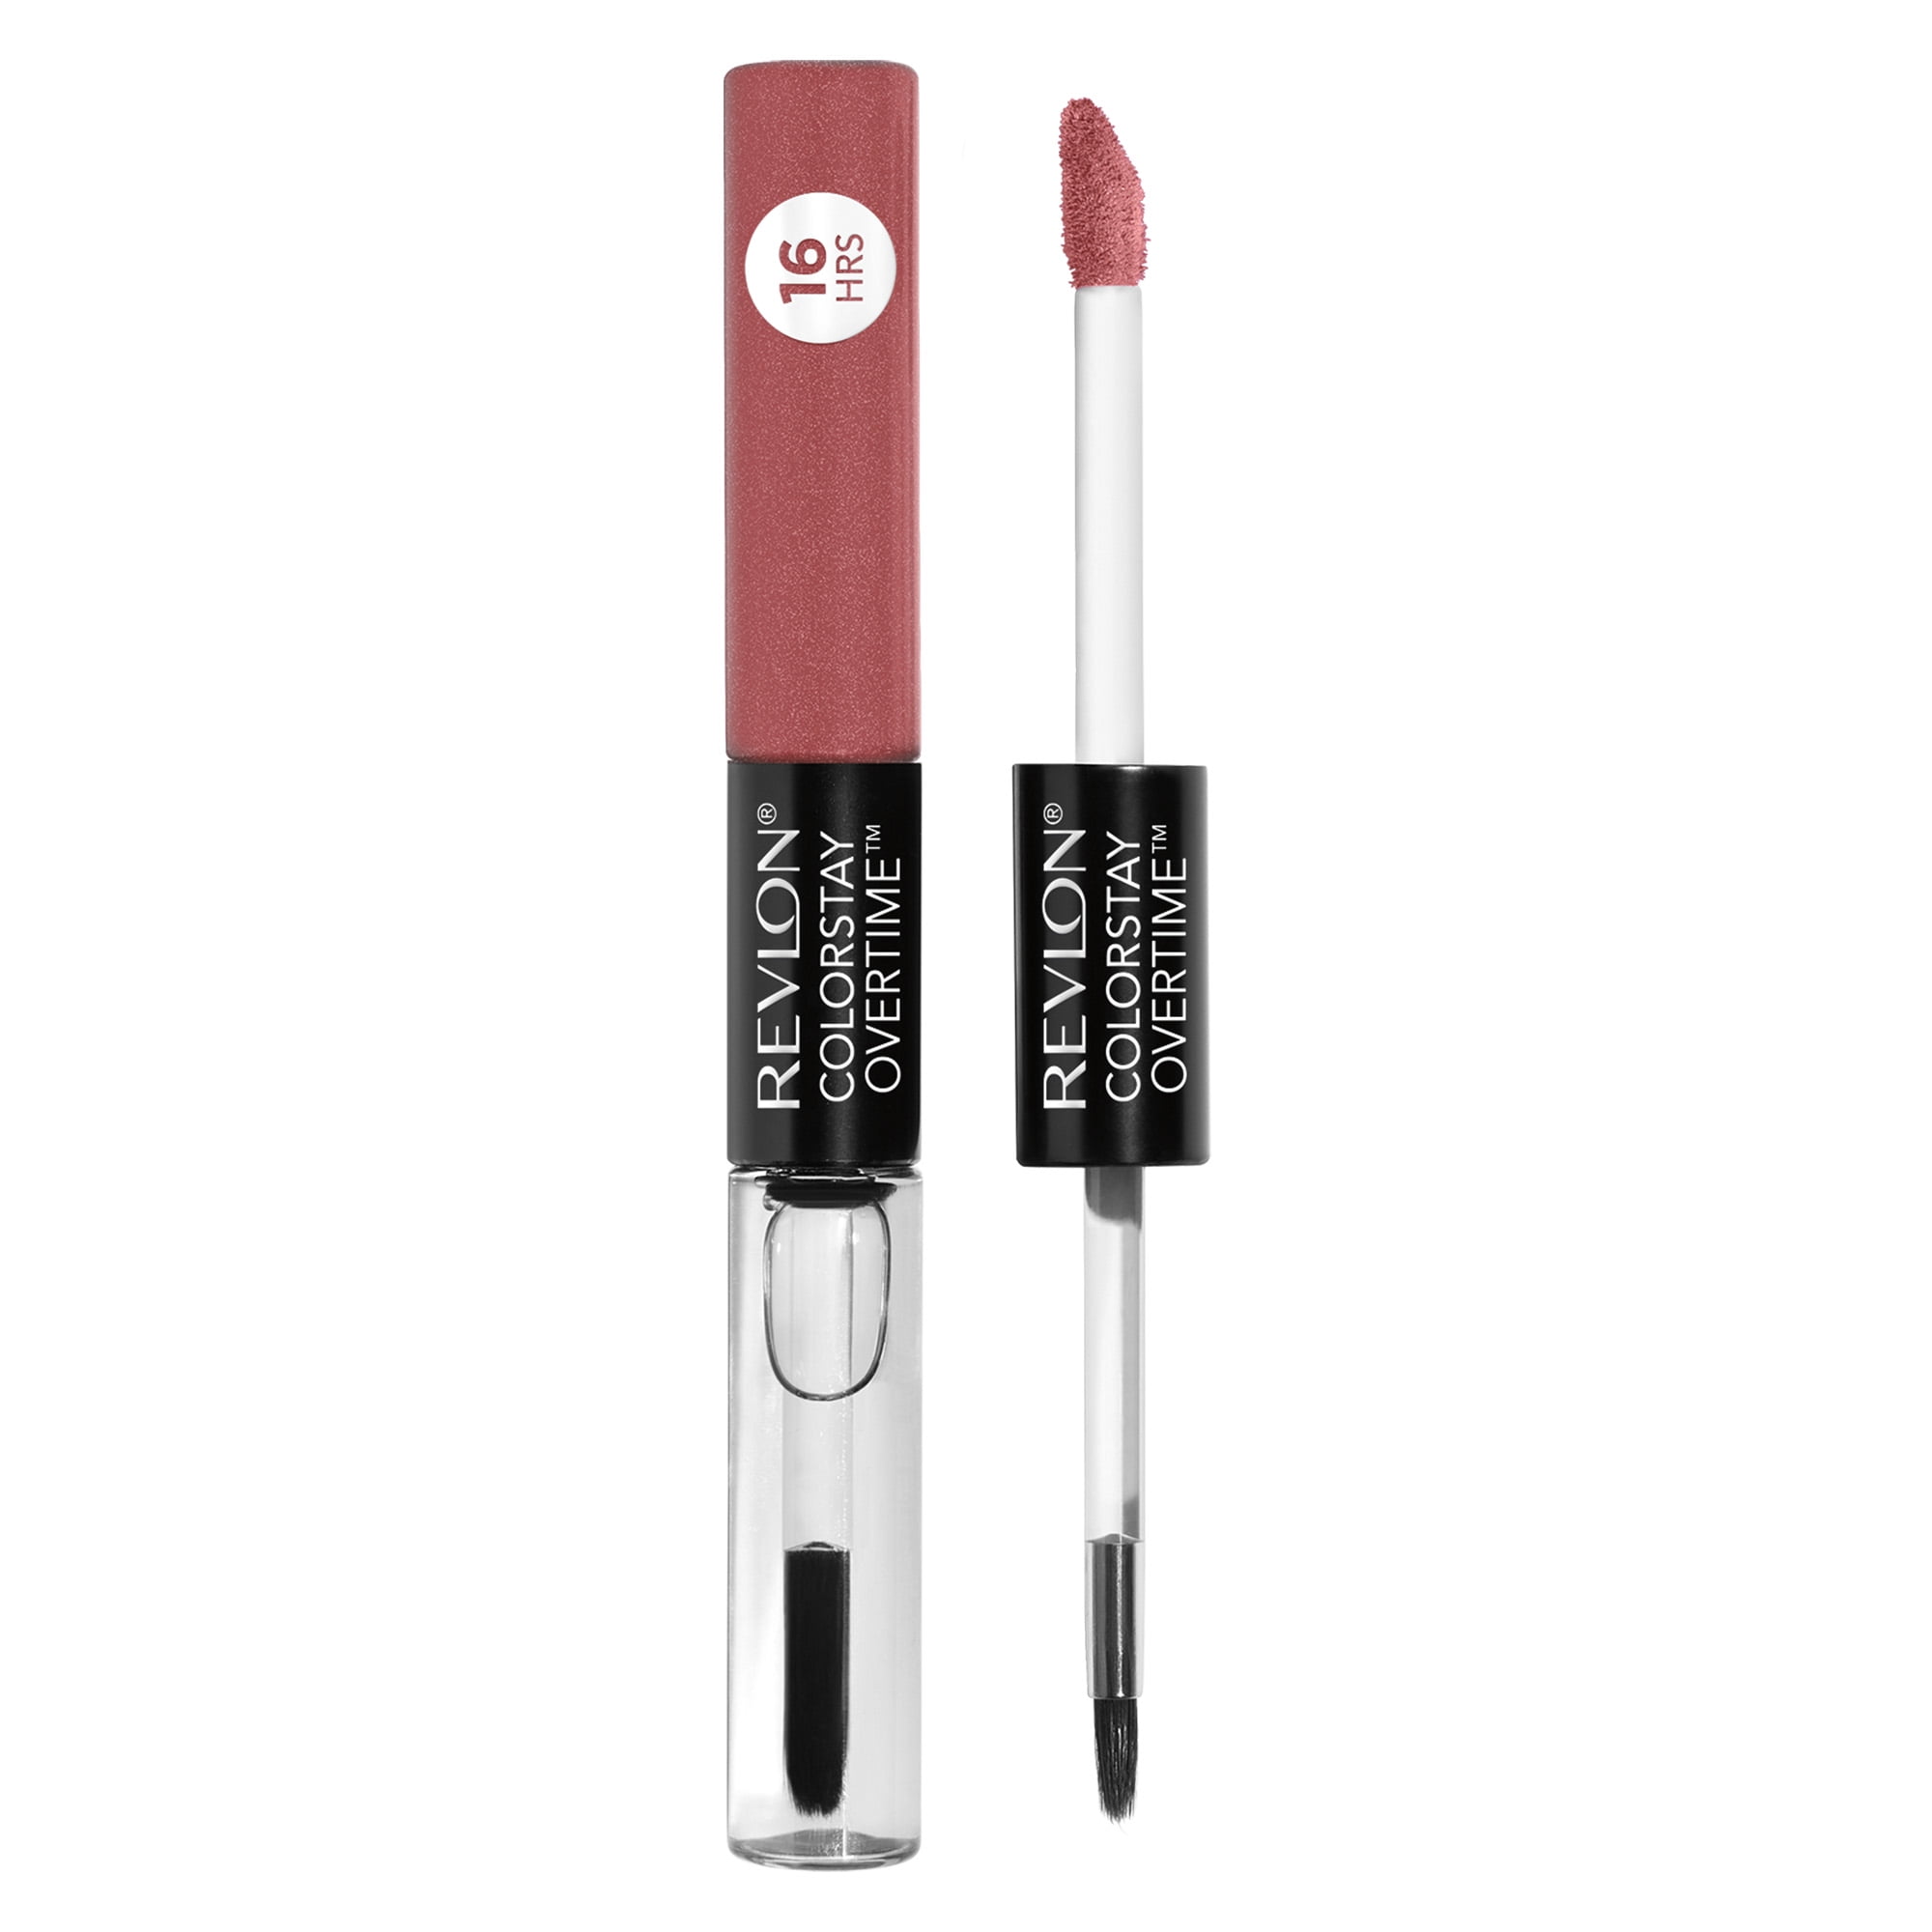 Revlon Liquid Lipstick with Clear Lip Gloss by Revlon, ColorStay Face Makeup, Overtime Lipcolor, Dual Ended with Vitamin E in Nude, 350 Bare Maximum, 0.07 fl oz